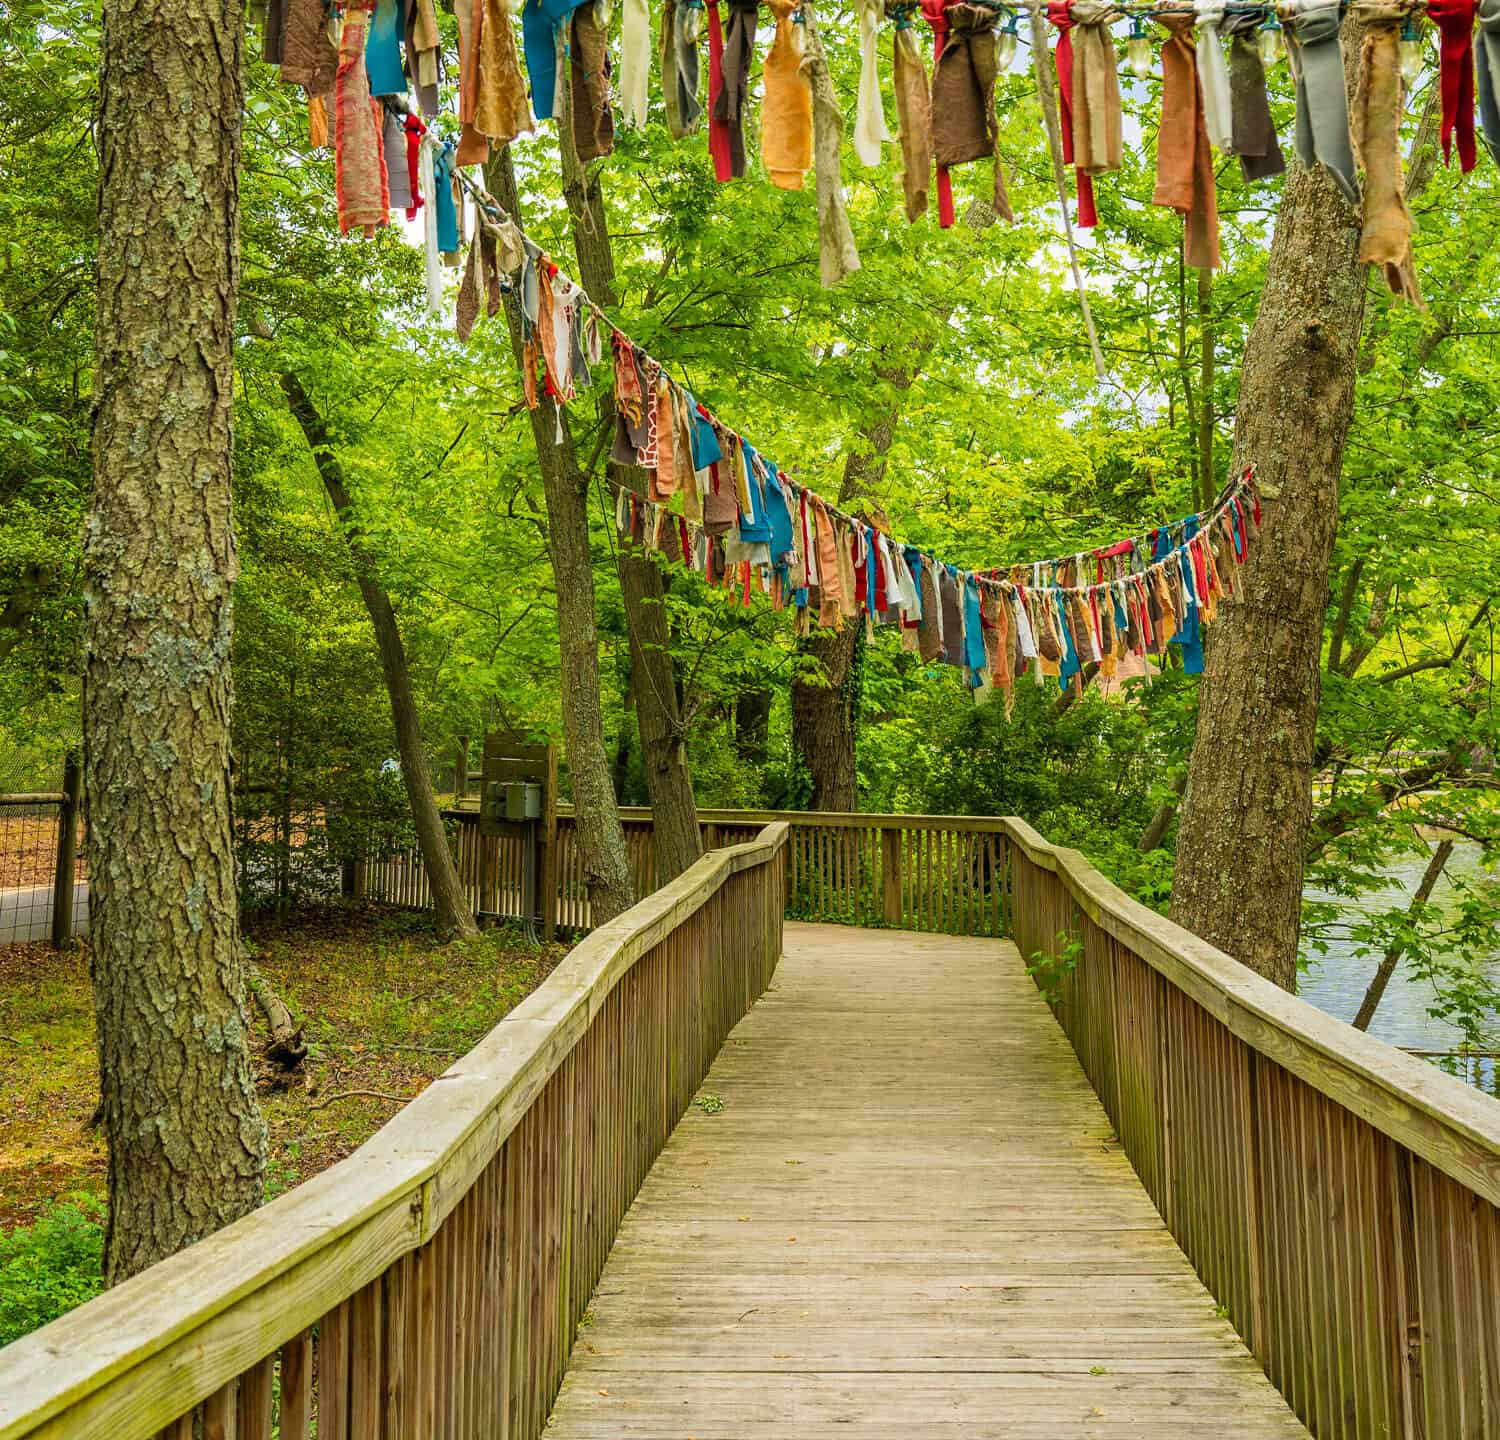 colorful strips of fabric hang from ropes above the boardwalk within the Cohanzick Zoo in Bridgeton, New Jersey